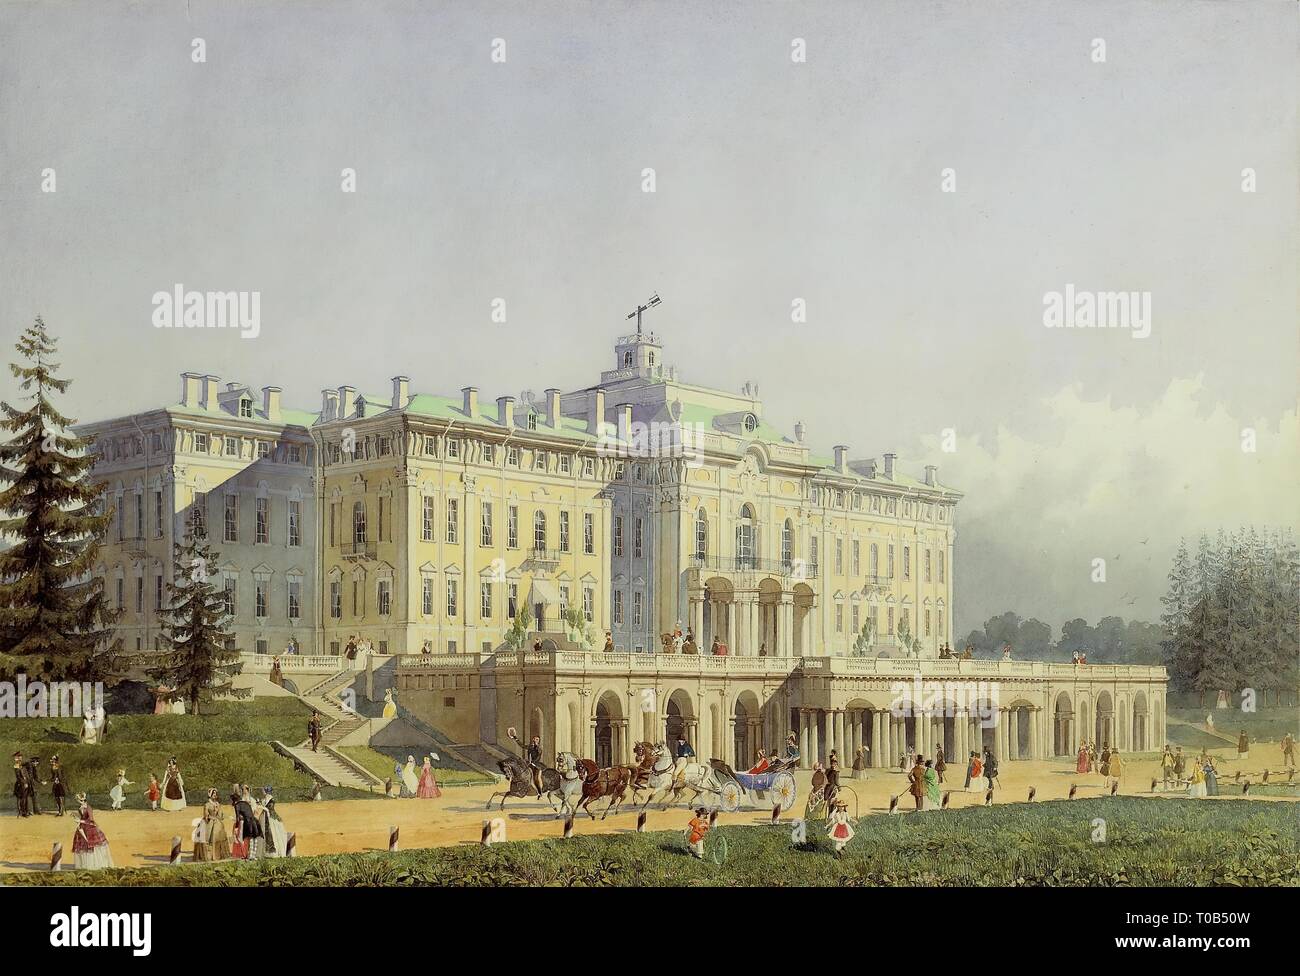 'Palace in Strelna'. Series "Views of St Petersburg and Moscow", produce as a gift to Queen Victoria on the occasion of the 10th anniversary of her reign. Russia, 1847. Dimensions: 25,7x38 cm. Museum: State Hermitage, St. Petersburg. Author: Alexey Gornostayev . Alexei Maximovich Gornostayev. Stock Photo